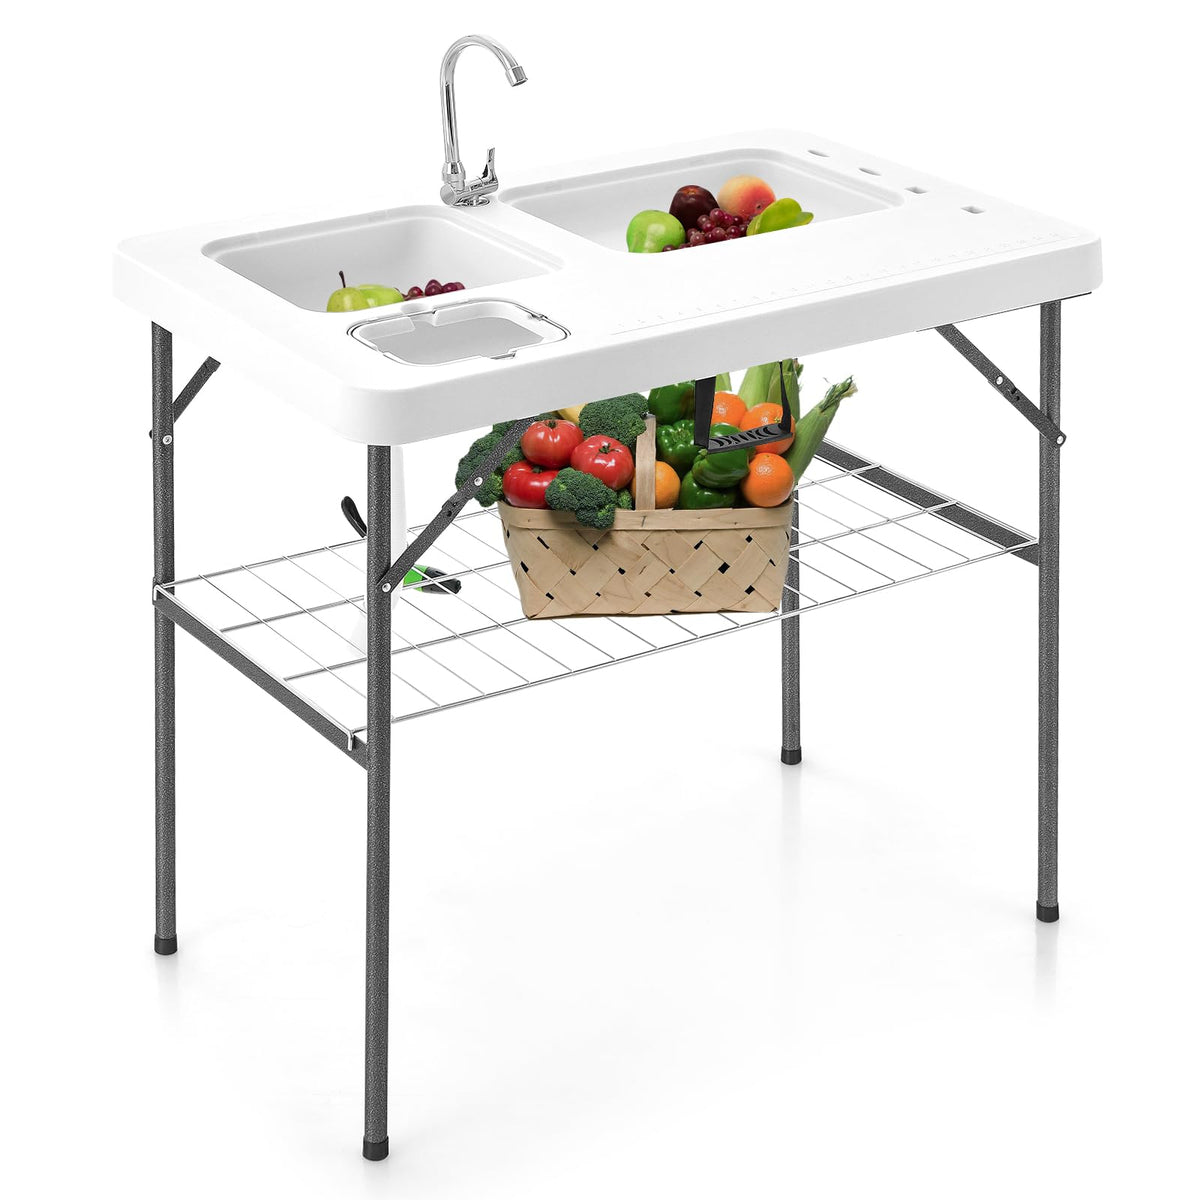 Goplus 40'' Folding Fish Cleaning Table with Dual Water Basins